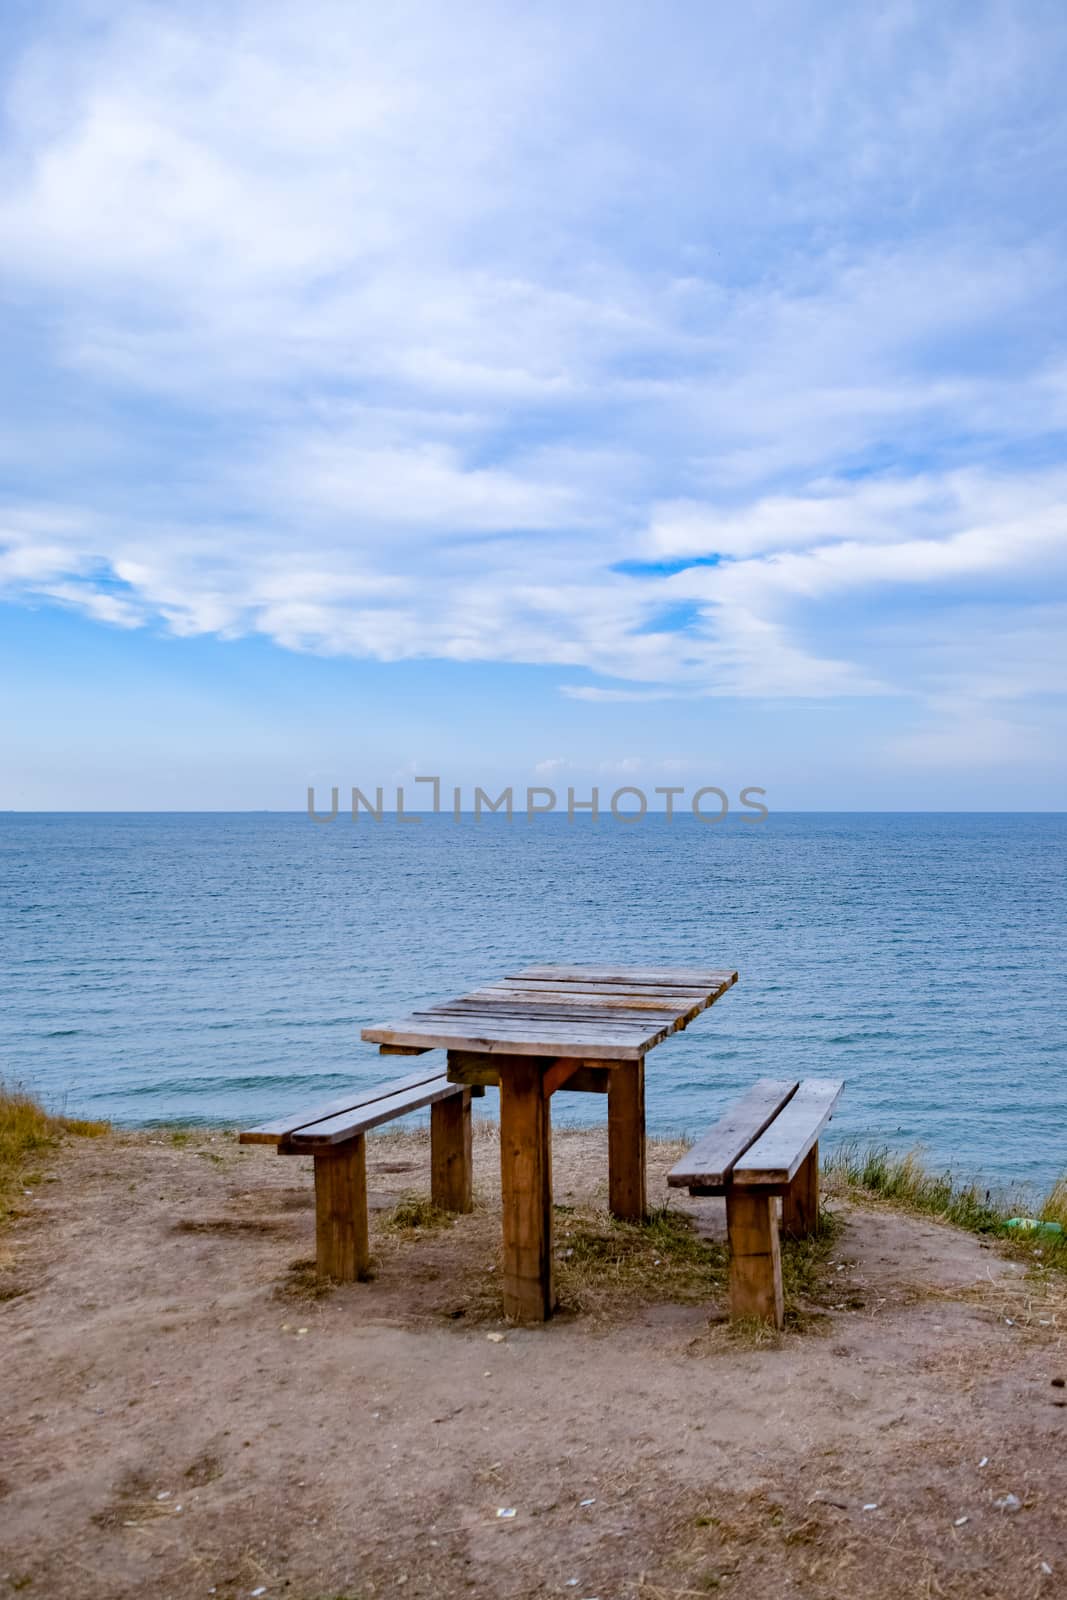 A table and benches by the sea. A place to sit and relax.